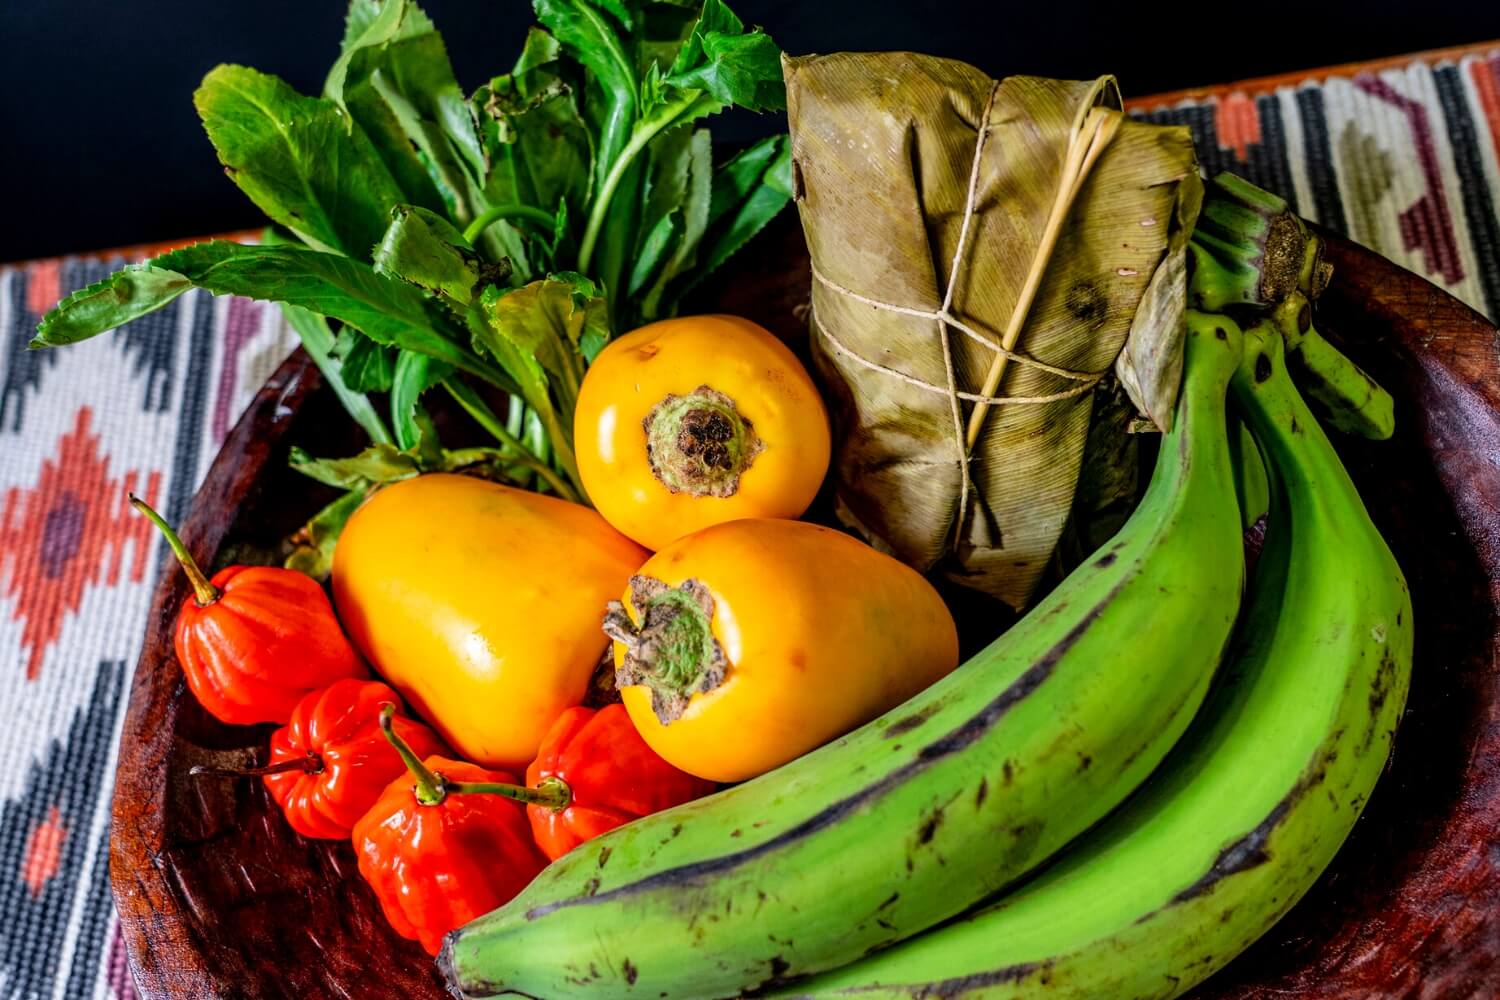 THE AMAZON RAINFOREST HAS 80% OF OUR FOOD VARIETIES